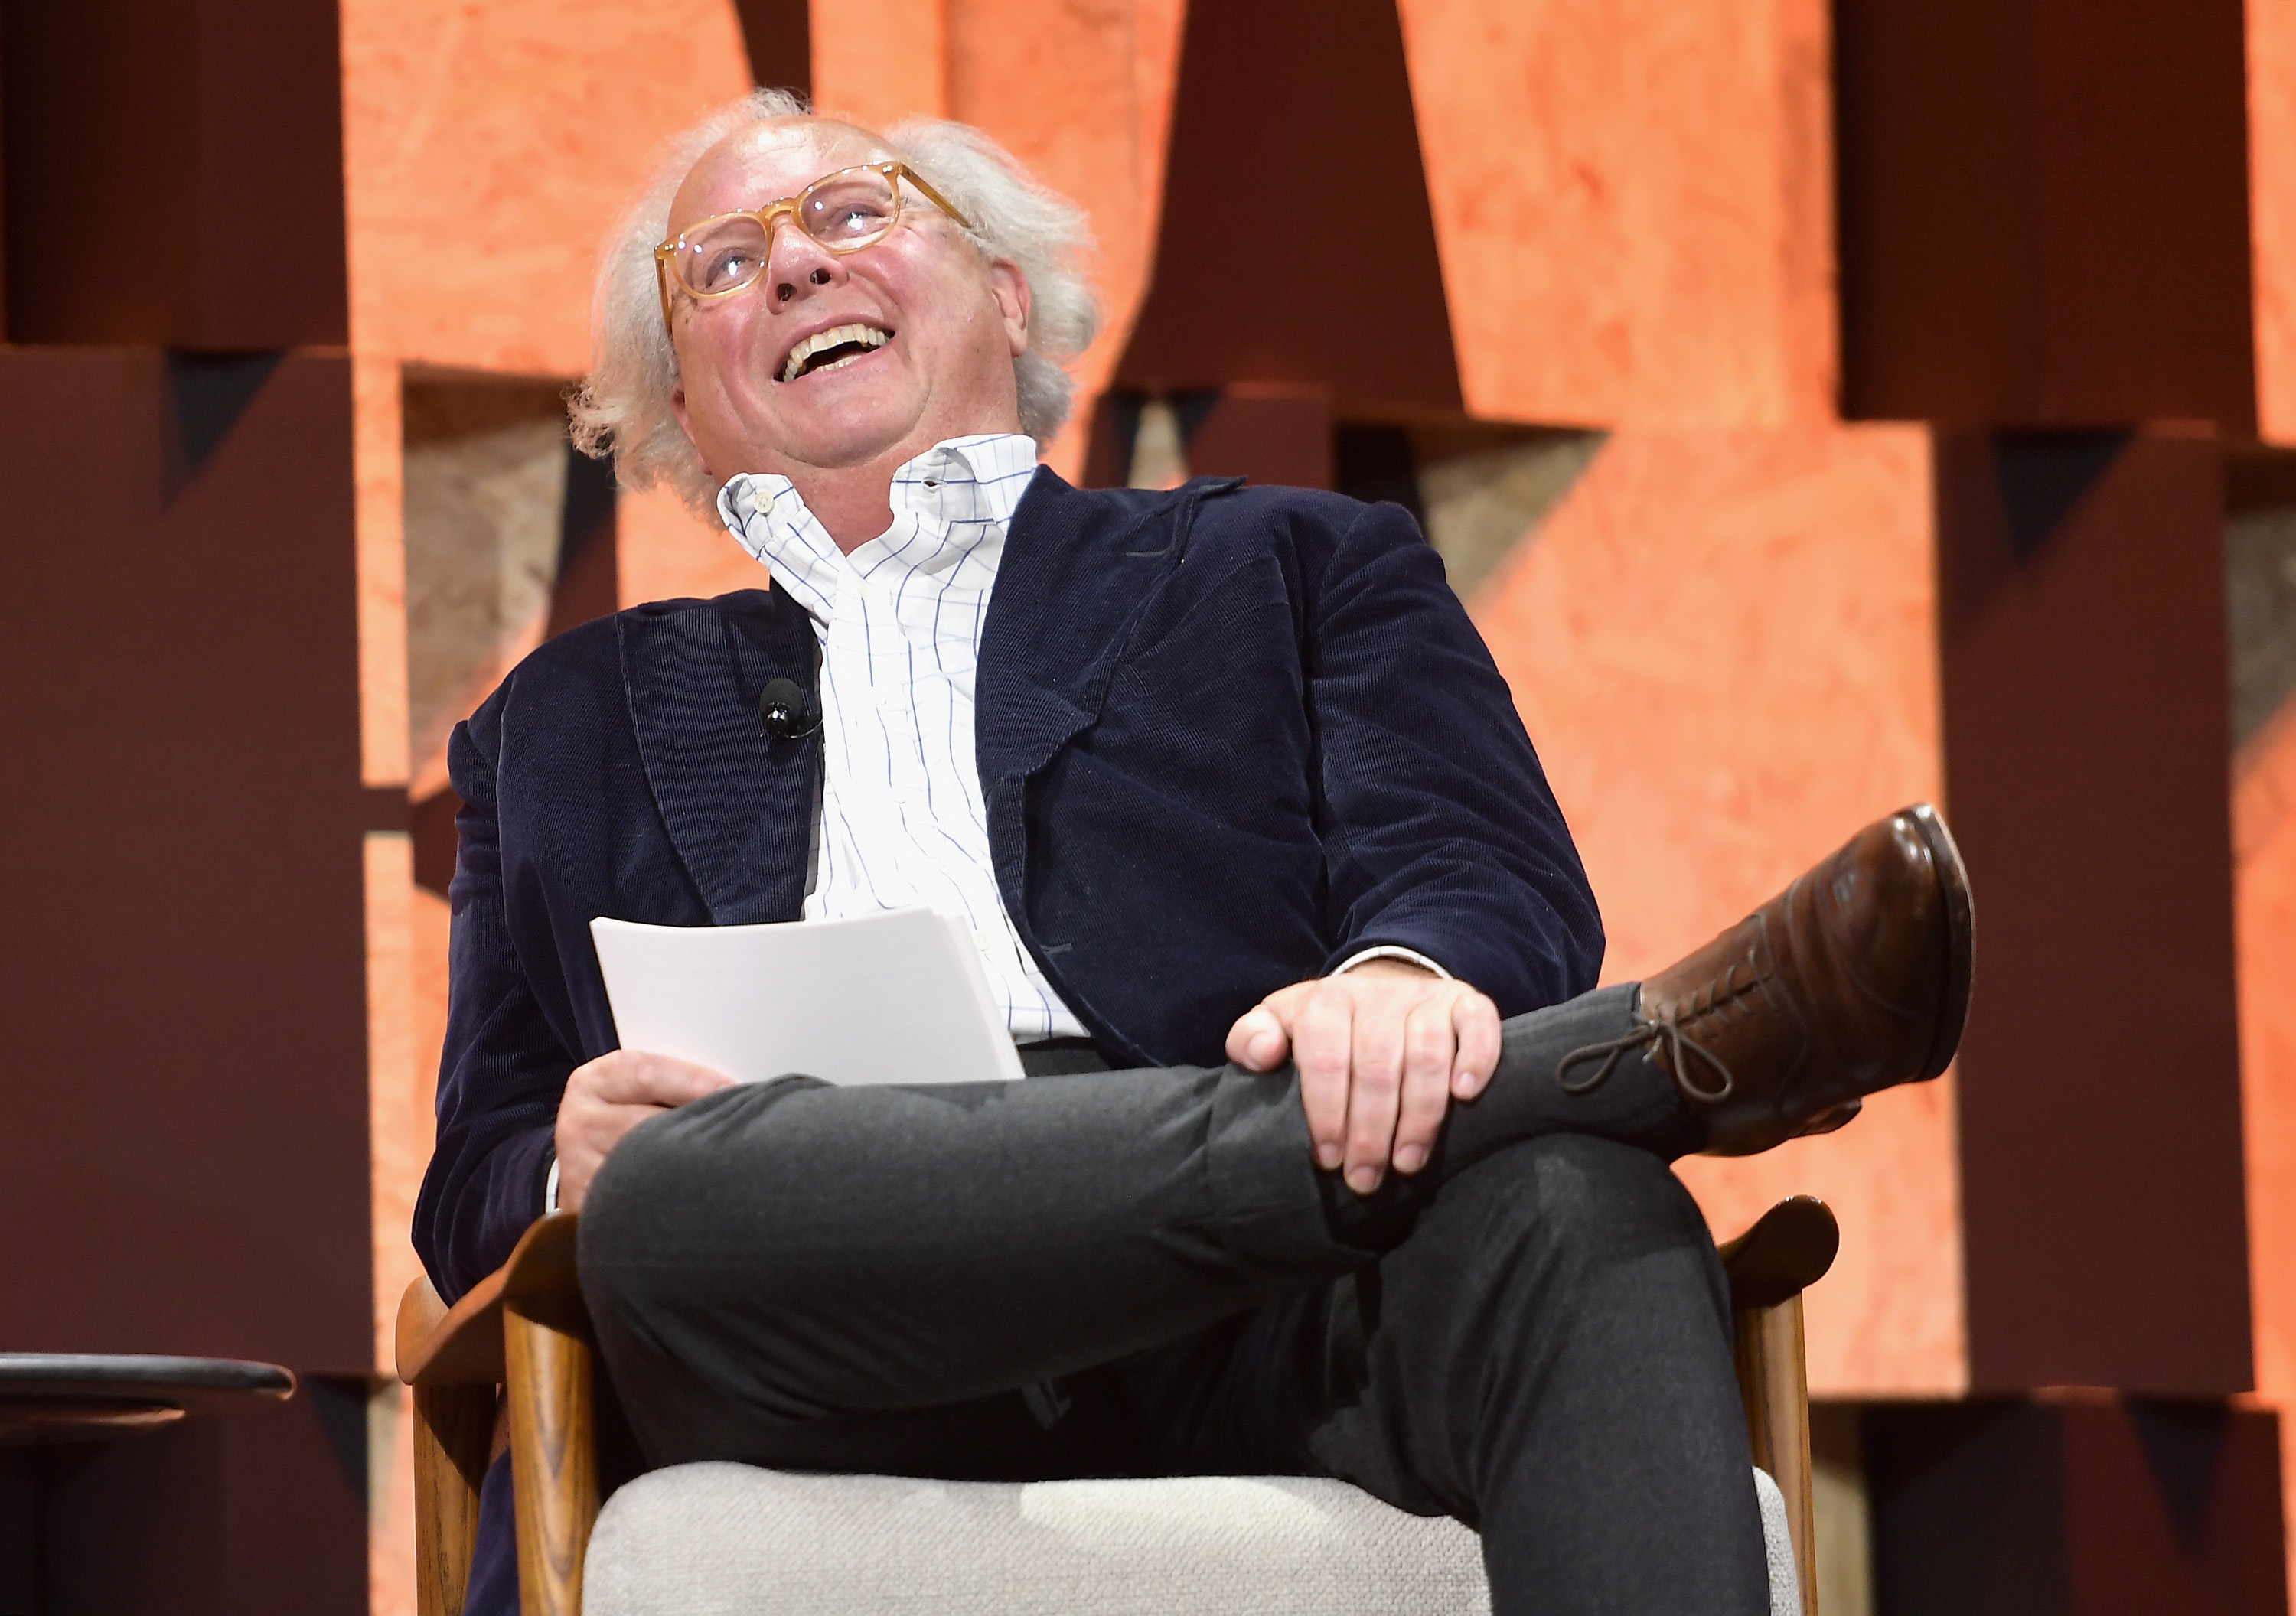 Graydon Carter launched Air Mail over the weekend. (Photo by Matt Winkelmeyer/Getty Images)